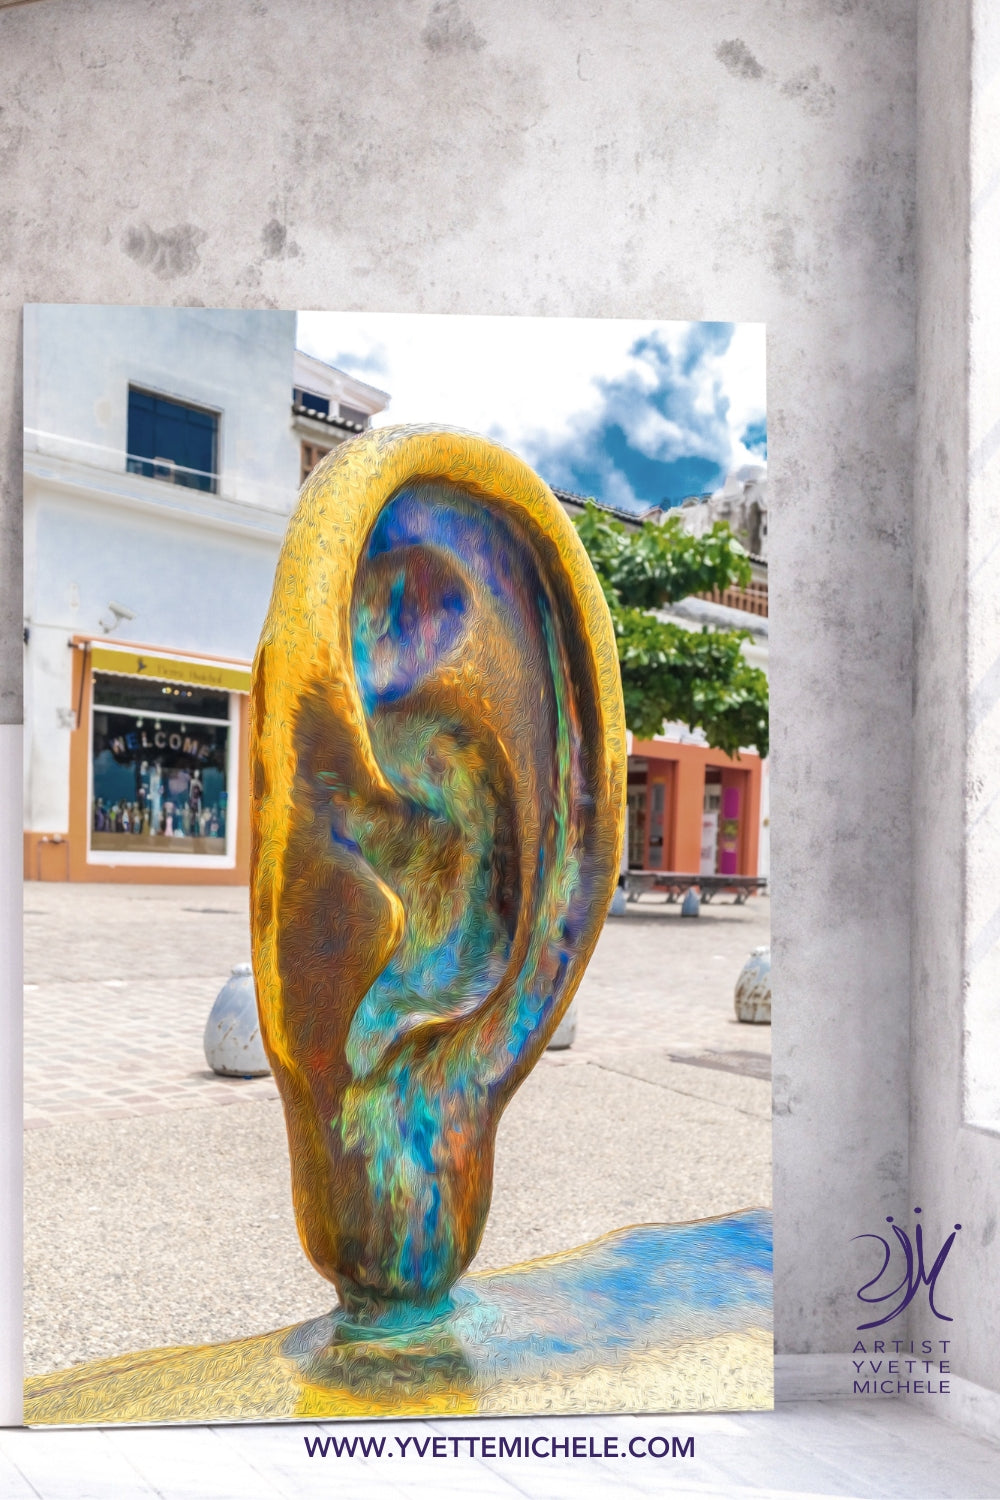 Walk On The Malecon -Vincent's Ear - Single Edition Photography Print - House of Yvette Michele 